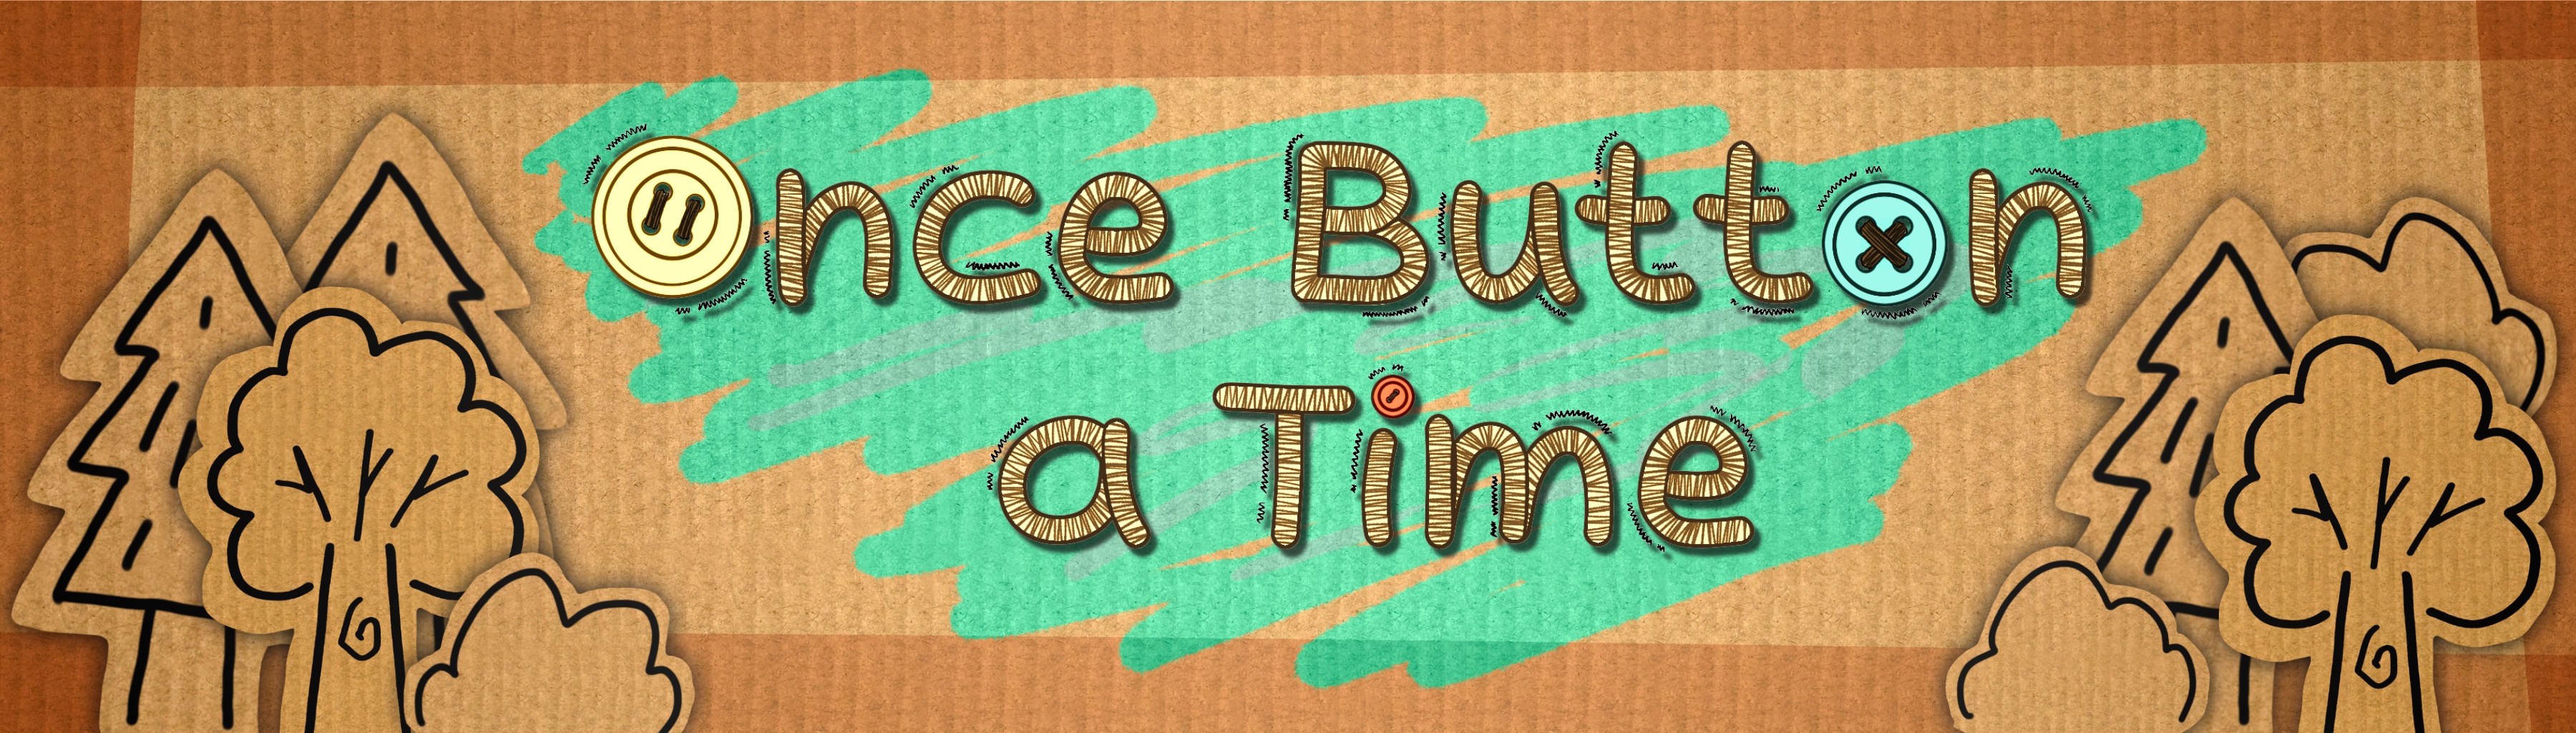 Once Button a Time